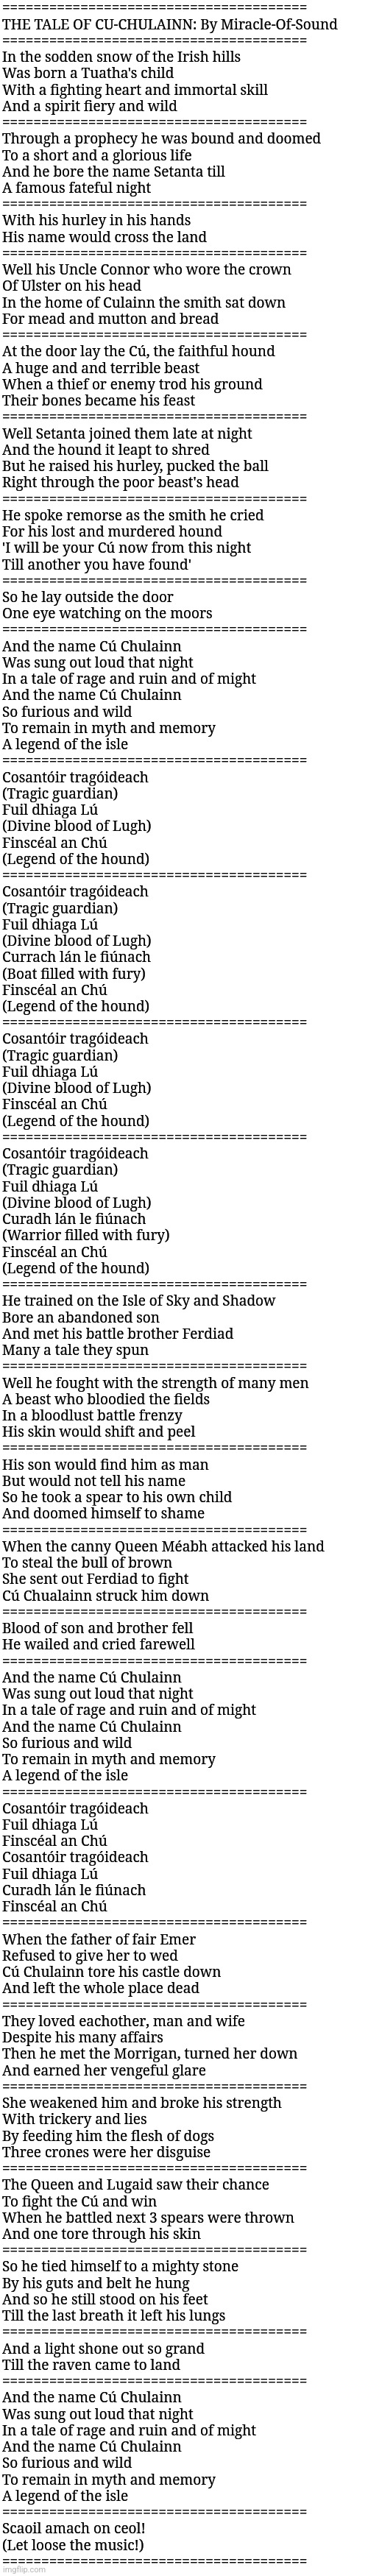 THE TALE OF CU-CHULAINN: By Miracle-Of-Sound (REPOST - NOT MINE) | =======================================
THE TALE OF CU-CHULAINN: By Miracle-Of-Sound
=======================================
In the sodden snow of the Irish hills
Was born a Tuatha's child
With a fighting heart and immortal skill
And a spirit fiery and wild
=======================================
Through a prophecy he was bound and doomed
To a short and a glorious life
And he bore the name Setanta till
A famous fateful night
=======================================
With his hurley in his hands
His name would cross the land
=======================================
Well his Uncle Connor who wore the crown
Of Ulster on his head
In the home of Culainn the smith sat down
For mead and mutton and bread
=======================================
At the door lay the Cú, the faithful hound
A huge and and terrible beast
When a thief or enemy trod his ground
Their bones became his feast
=======================================
Well Setanta joined them late at night
And the hound it leapt to shred
But he raised his hurley, pucked the ball
Right through the poor beast's head
=======================================
He spoke remorse as the smith he cried
For his lost and murdered hound
'I will be your Cú now from this night
Till another you have found'
=======================================
So he lay outside the door
One eye watching on the moors
=======================================
And the name Cú Chulainn
Was sung out loud that night
In a tale of rage and ruin and of might
And the name Cú Chulainn
So furious and wild
To remain in myth and memory
A legend of the isle
=======================================
Cosantóir tragóideach
(Tragic guardian)
Fuil dhiaga Lú
(Divine blood of Lugh)
Finscéal an Chú
(Legend of the hound)
=======================================
Cosantóir tragóideach
(Tragic guardian)
Fuil dhiaga Lú
(Divine blood of Lugh)
Currach lán le fiúnach
(Boat filled with fury)
Finscéal an Chú
(Legend of the hound)
=======================================
Cosantóir tragóideach
(Tragic guardian)
Fuil dhiaga Lú
(Divine blood of Lugh)
Finscéal an Chú
(Legend of the hound)
=======================================
Cosantóir tragóideach
(Tragic guardian)
Fuil dhiaga Lú
(Divine blood of Lugh)
Curadh lán le fiúnach
(Warrior filled with fury)
Finscéal an Chú
(Legend of the hound)
=======================================
He trained on the Isle of Sky and Shadow
Bore an abandoned son
And met his battle brother Ferdiad
Many a tale they spun
=======================================
Well he fought with the strength of many men
A beast who bloodied the fields
In a bloodlust battle frenzy
His skin would shift and peel
=======================================
His son would find him as man
But would not tell his name
So he took a spear to his own child
And doomed himself to shame
=======================================
When the canny Queen Méabh attacked his land
To steal the bull of brown
She sent out Ferdiad to fight
Cú Chualainn struck him down
=======================================
Blood of son and brother fell
He wailed and cried farewell
=======================================
And the name Cú Chulainn
Was sung out loud that night
In a tale of rage and ruin and of might
And the name Cú Chulainn
So furious and wild
To remain in myth and memory
A legend of the isle
=======================================
Cosantóir tragóideach
Fuil dhiaga Lú
Finscéal an Chú
Cosantóir tragóideach
Fuil dhiaga Lú
Curadh lán le fiúnach
Finscéal an Chú
=======================================
When the father of fair Emer
Refused to give her to wed
Cú Chulainn tore his castle down
And left the whole place dead
=======================================
They loved eachother, man and wife
Despite his many affairs
Then he met the Morrigan, turned her down
And earned her vengeful glare
=======================================
She weakened him and broke his strength
With trickery and lies
By feeding him the flesh of dogs
Three crones were her disguise
=======================================
The Queen and Lugaid saw their chance
To fight the Cú and win
When he battled next 3 spears were thrown
And one tore through his skin
=======================================
So he tied himself to a mighty stone
By his guts and belt he hung
And so he still stood on his feet
Till the last breath it left his lungs
=======================================
And a light shone out so grand
Till the raven came to land
=======================================
And the name Cú Chulainn
Was sung out loud that night
In a tale of rage and ruin and of might
And the name Cú Chulainn
So furious and wild
To remain in myth and memory
A legend of the isle
=======================================
Scaoil amach on ceol!
(Let loose the music!)
======================================= | image tagged in simothefinlandized,ireland,mythology,poetry,heroes | made w/ Imgflip meme maker